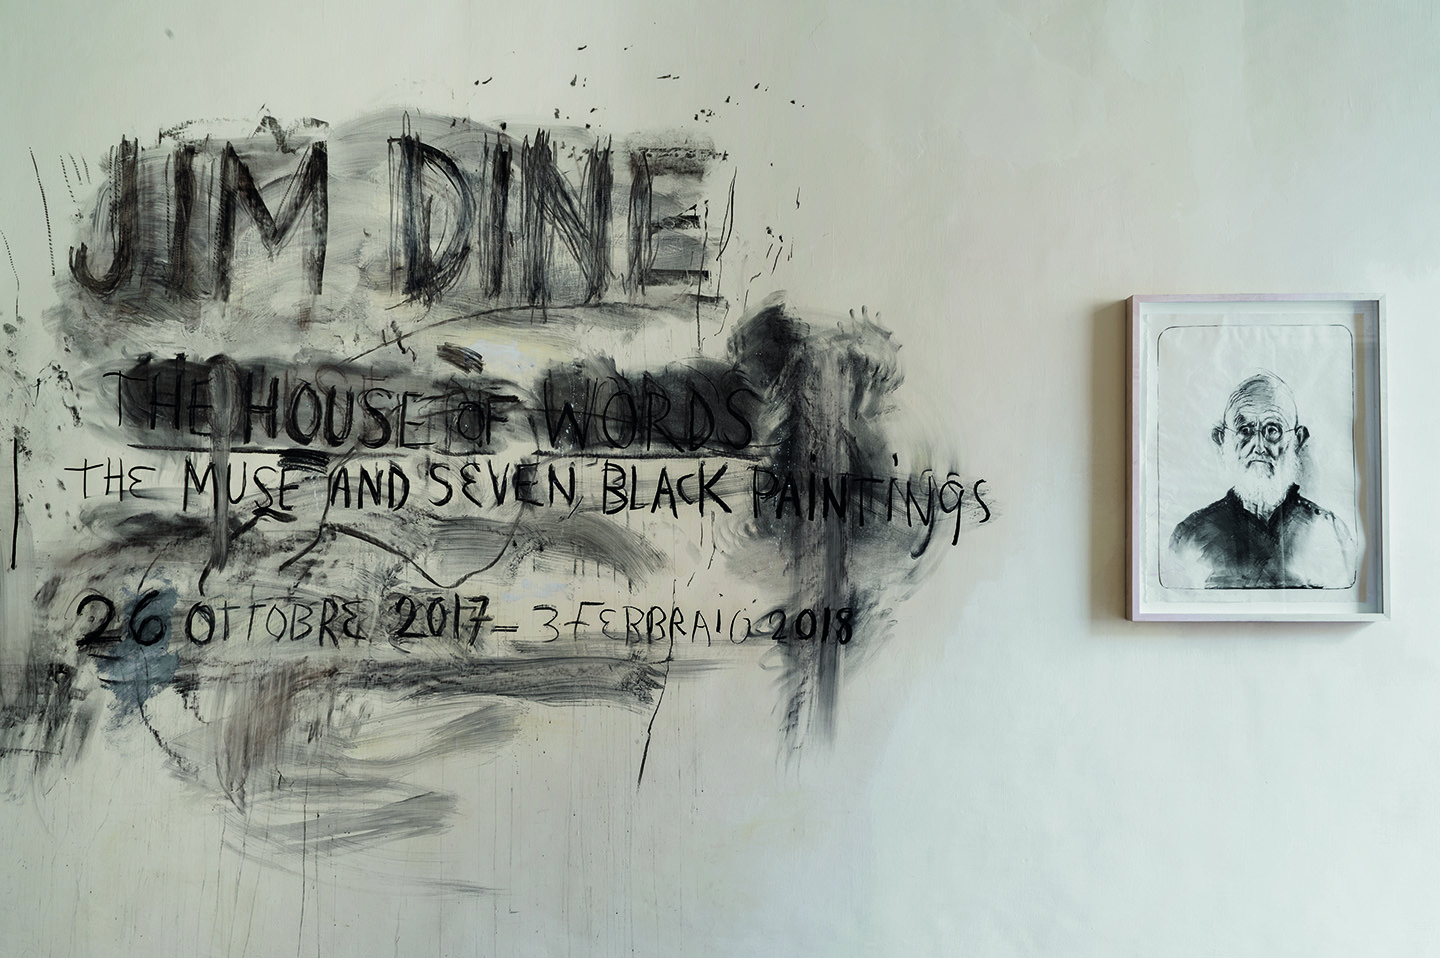 Jim Dine “HOUSE OF WORDS. The Muse and Seven Black Paintings” at